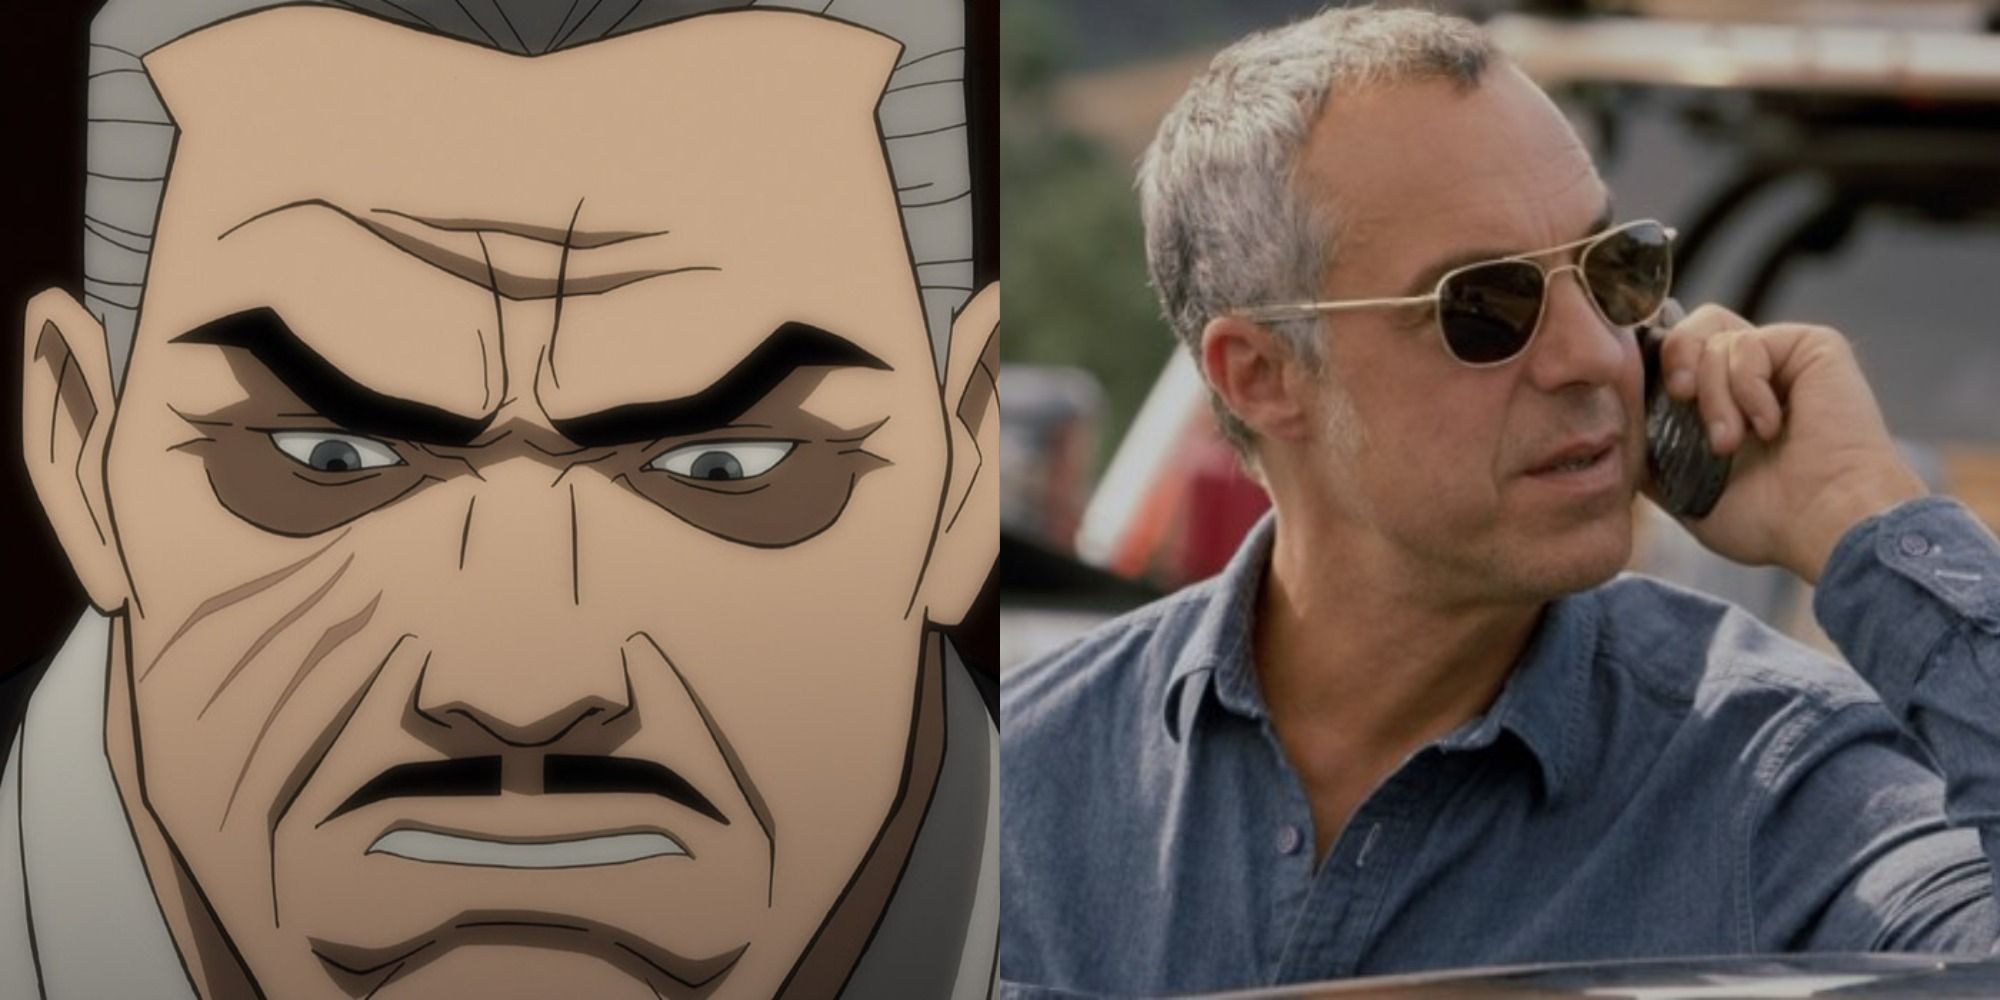 A split image of Falconi in The Long Halloween and Titus Welliver in Sons of Anarchy